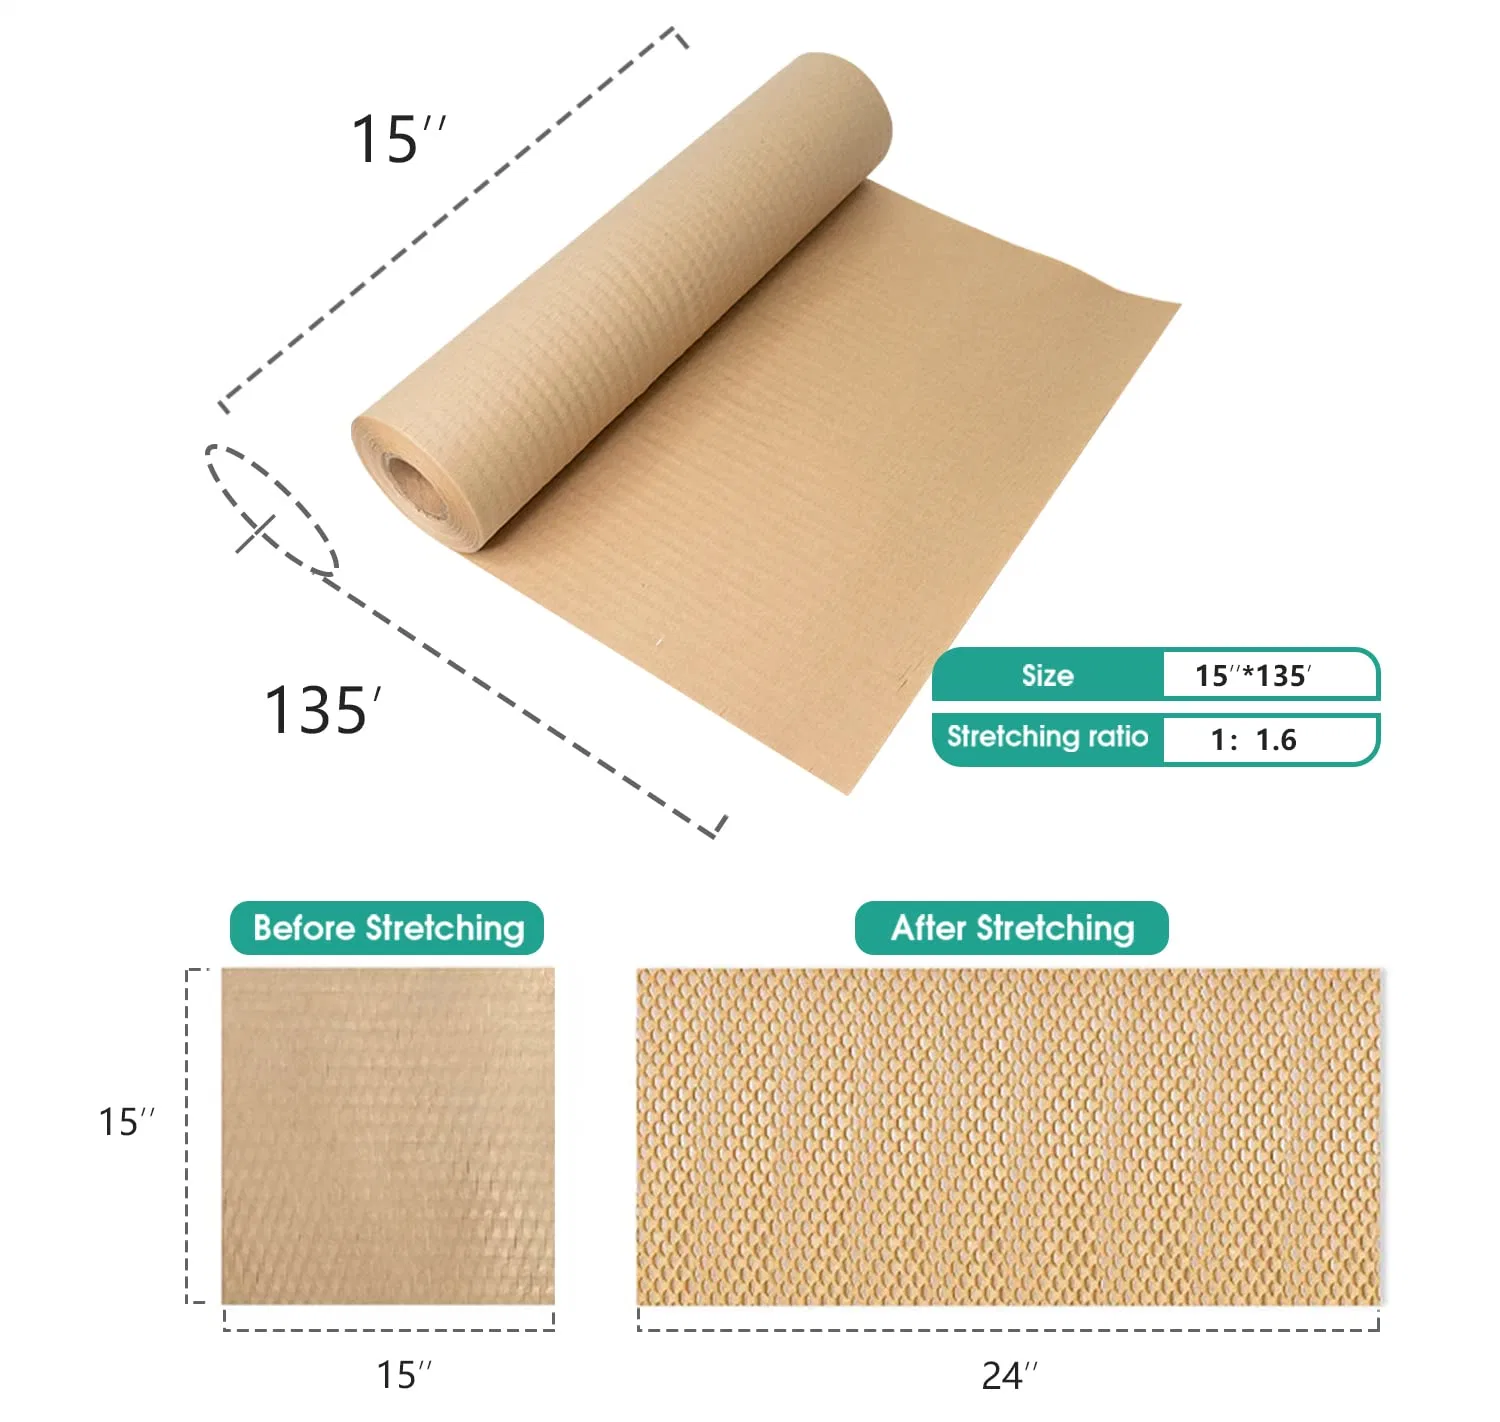 Honeycomb Packaging Paper, 15" X 135' Honeycomb Cushion Wrapping Paper for Protecting Fragile Items, Used for Moving Gift Packaging and Transportation Protectio